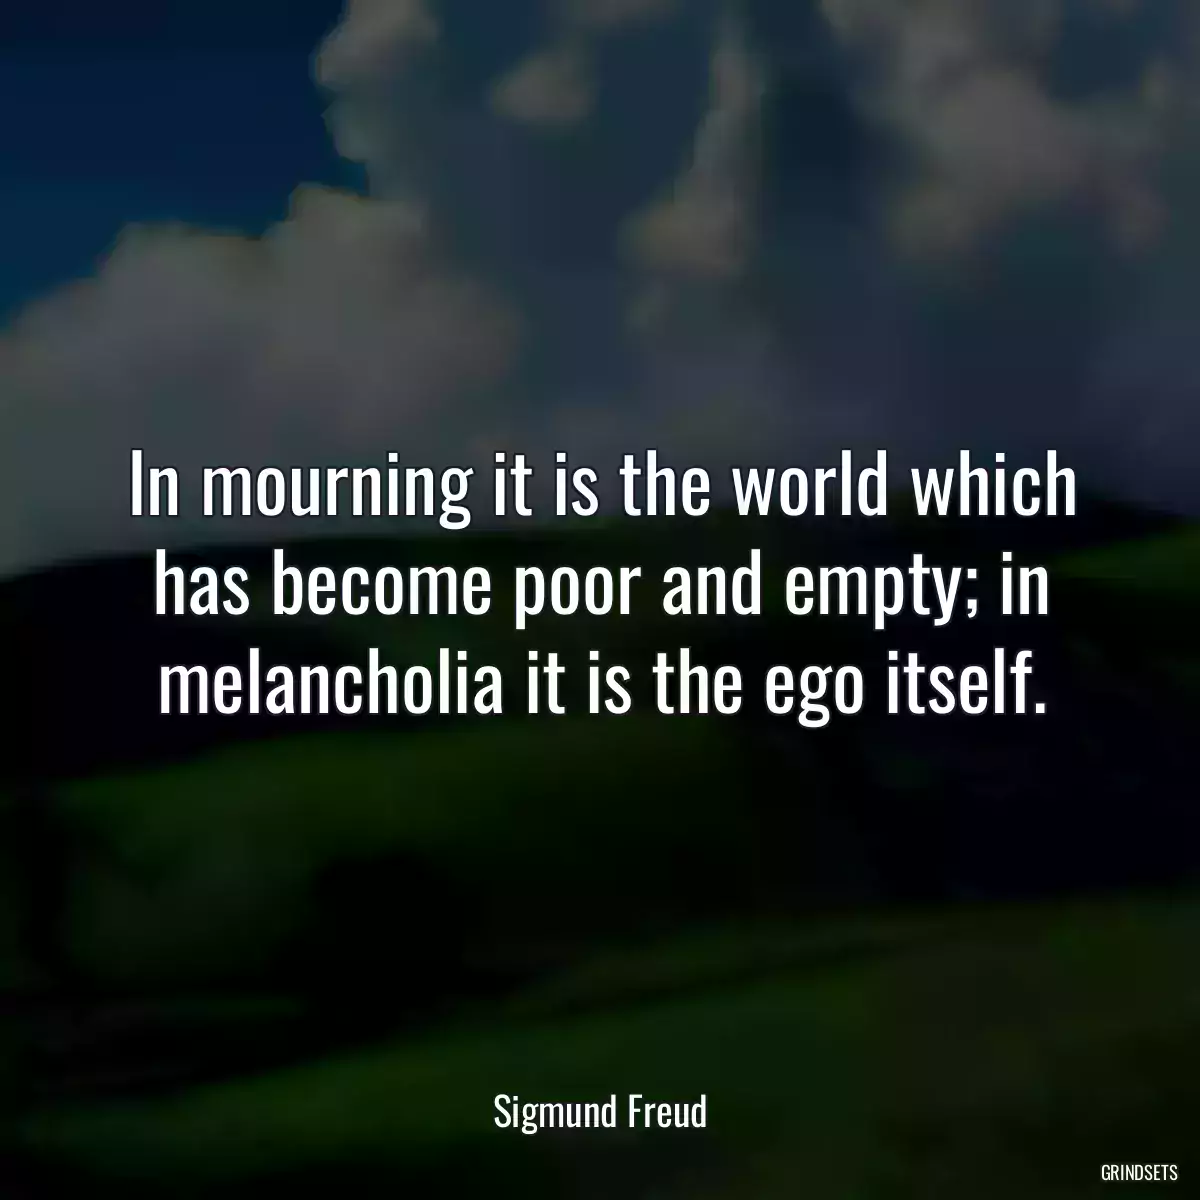 In mourning it is the world which has become poor and empty; in melancholia it is the ego itself.